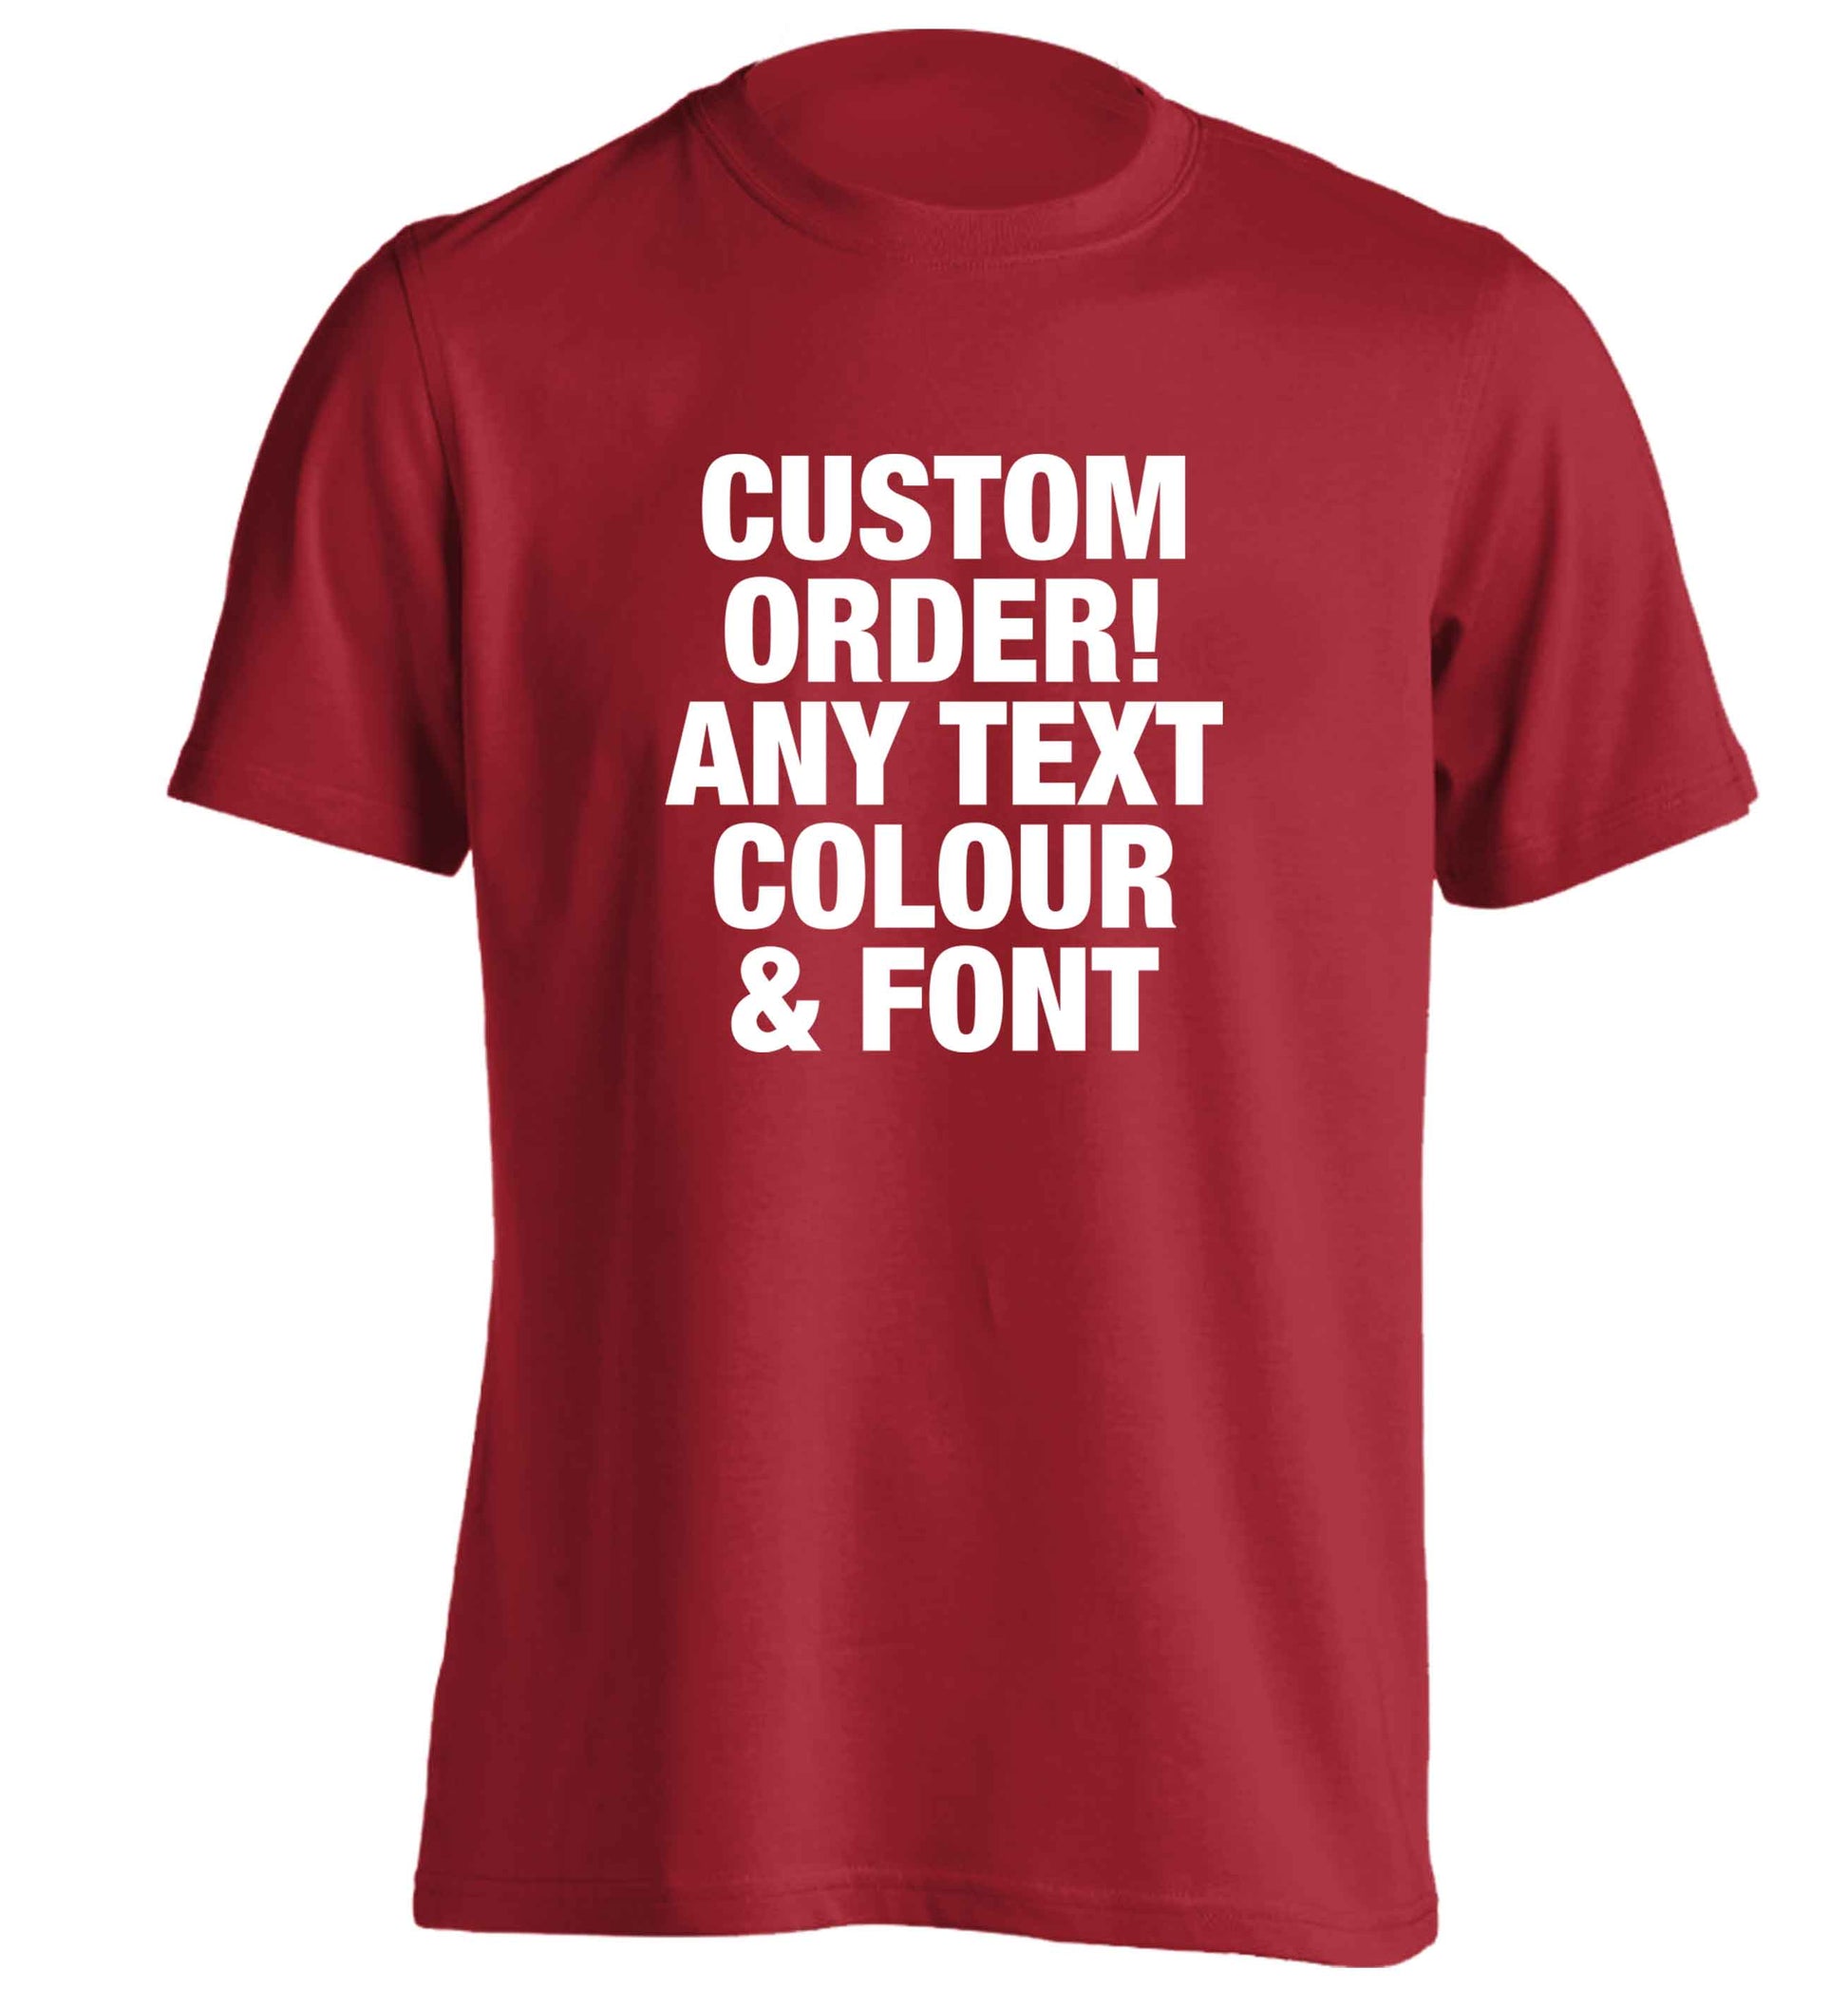 Custom order any text colour and font adults unisex red Tshirt 2XL